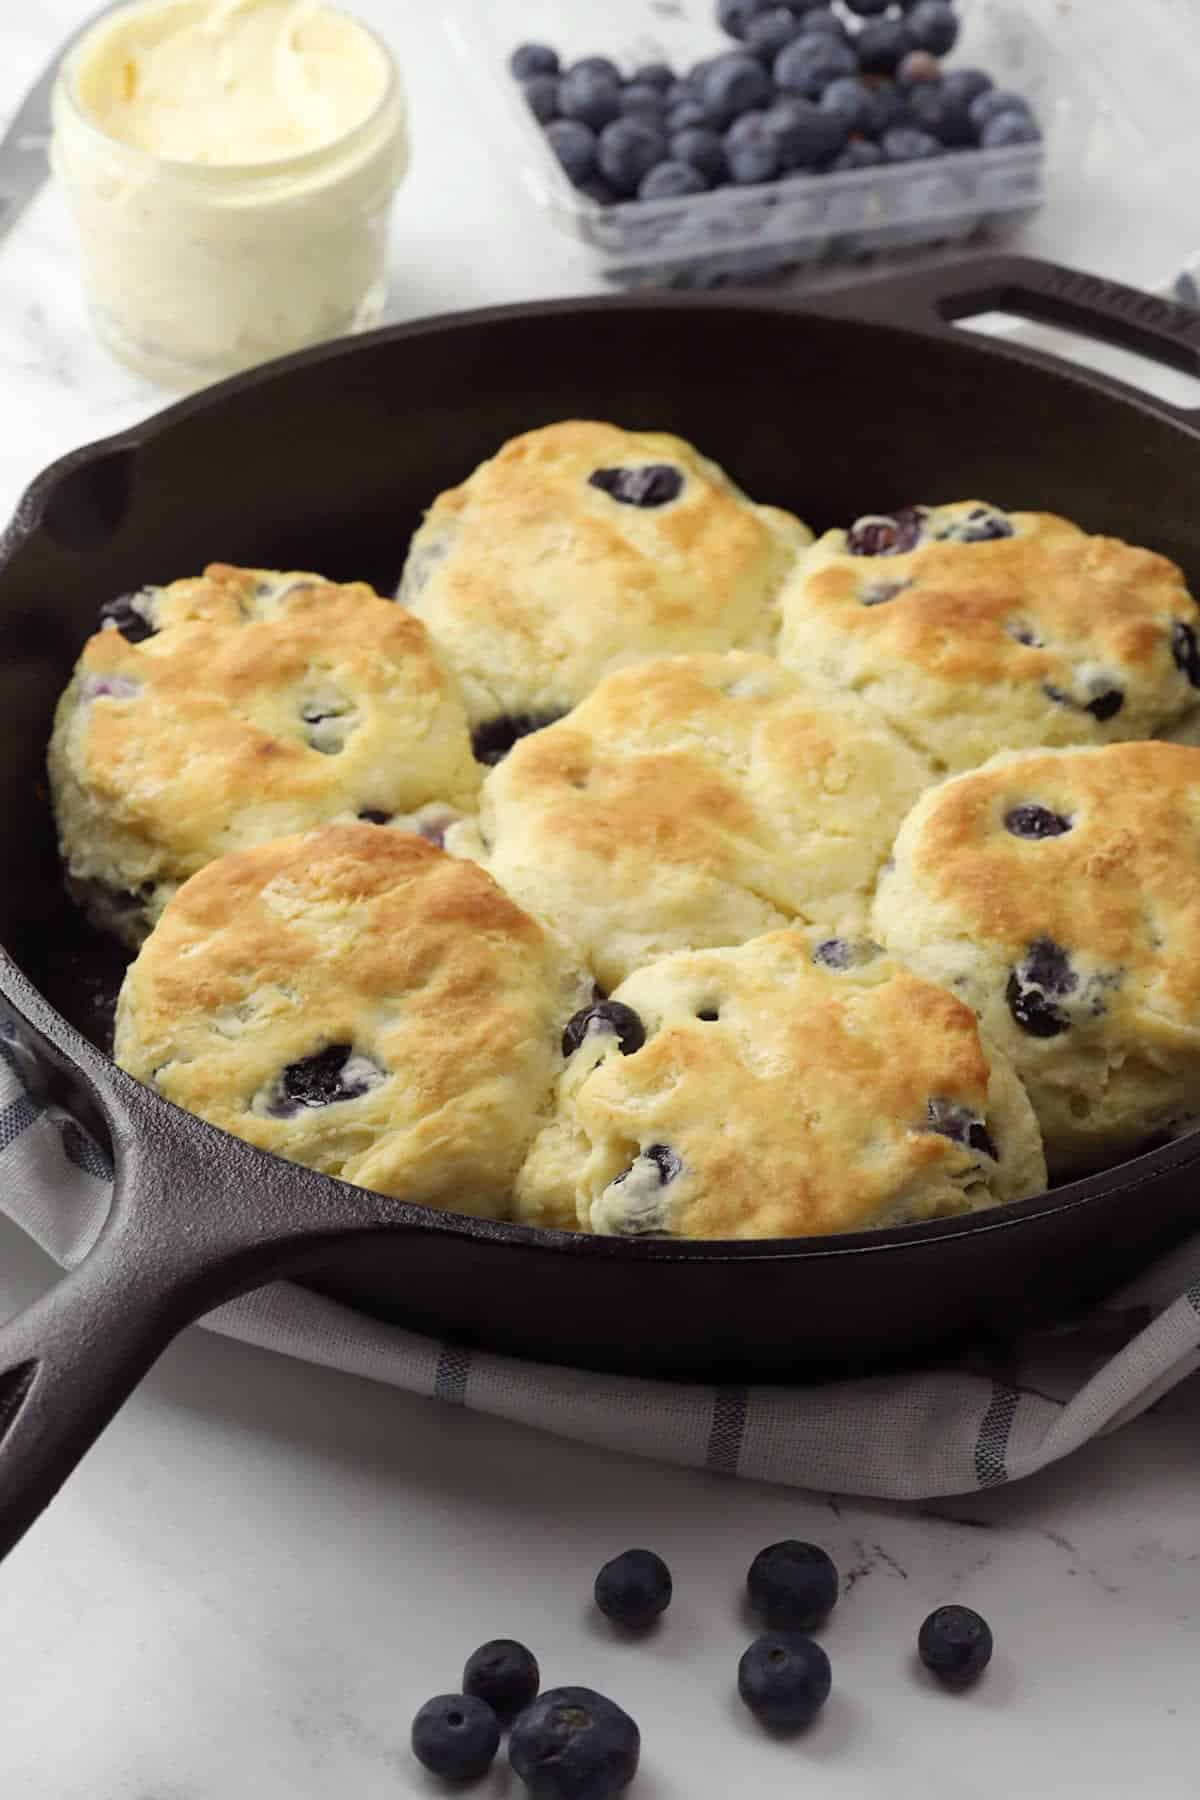 Cast iron skillet filled with baked blueberry biscuits.